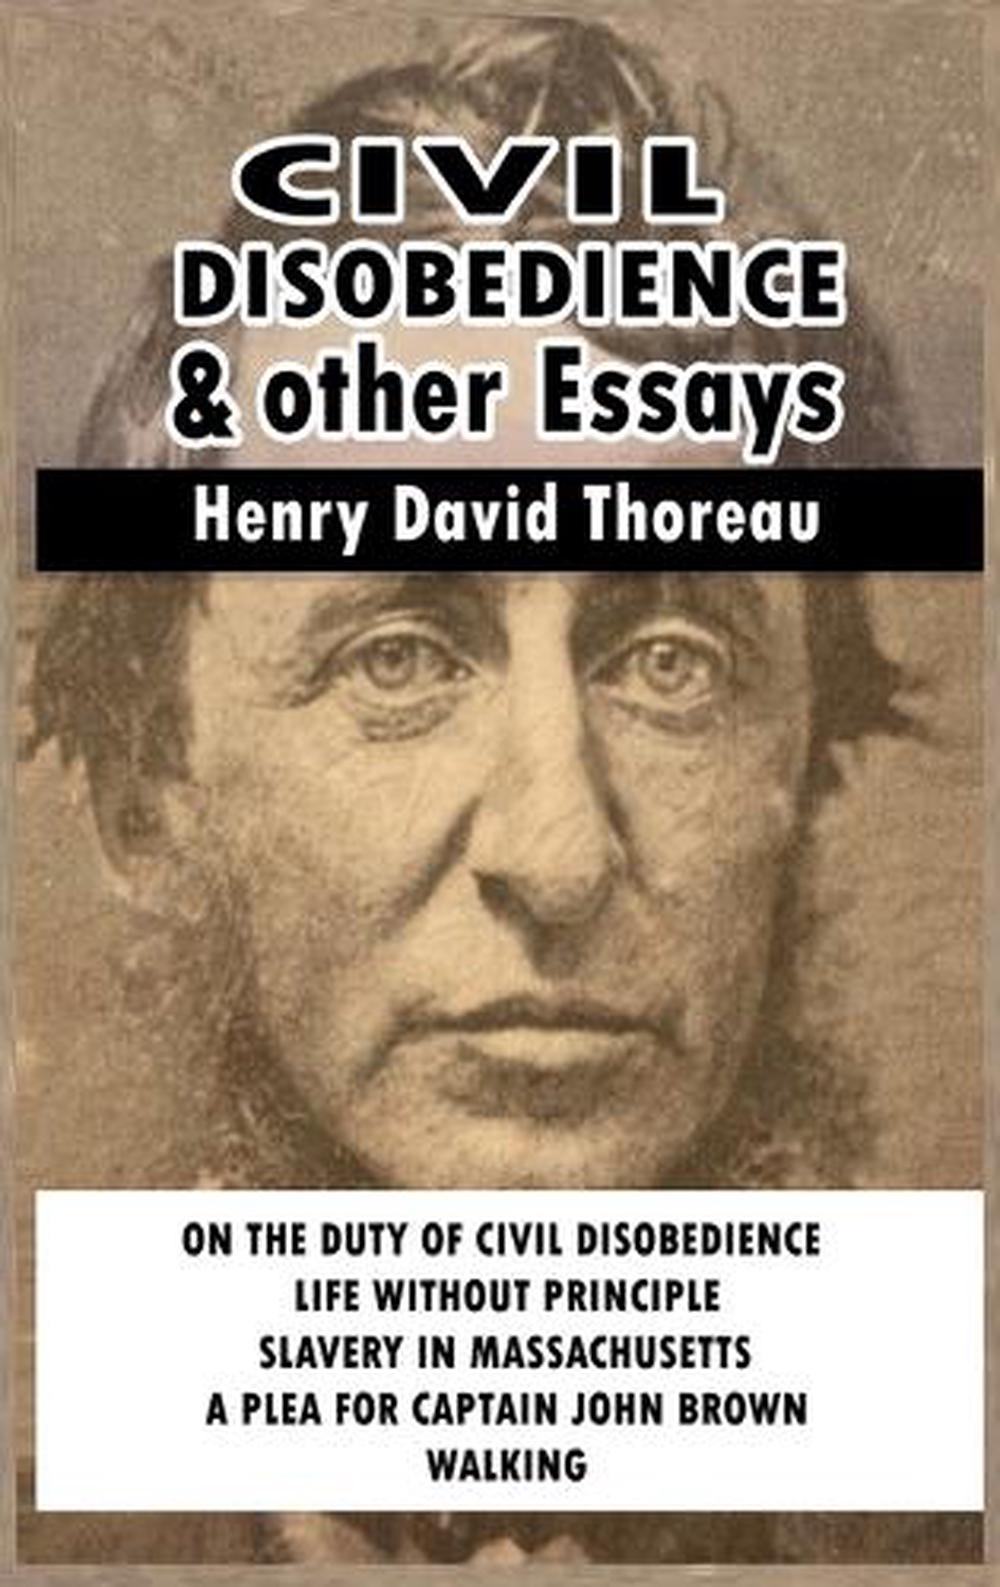 civil disobedience essay by thoreau